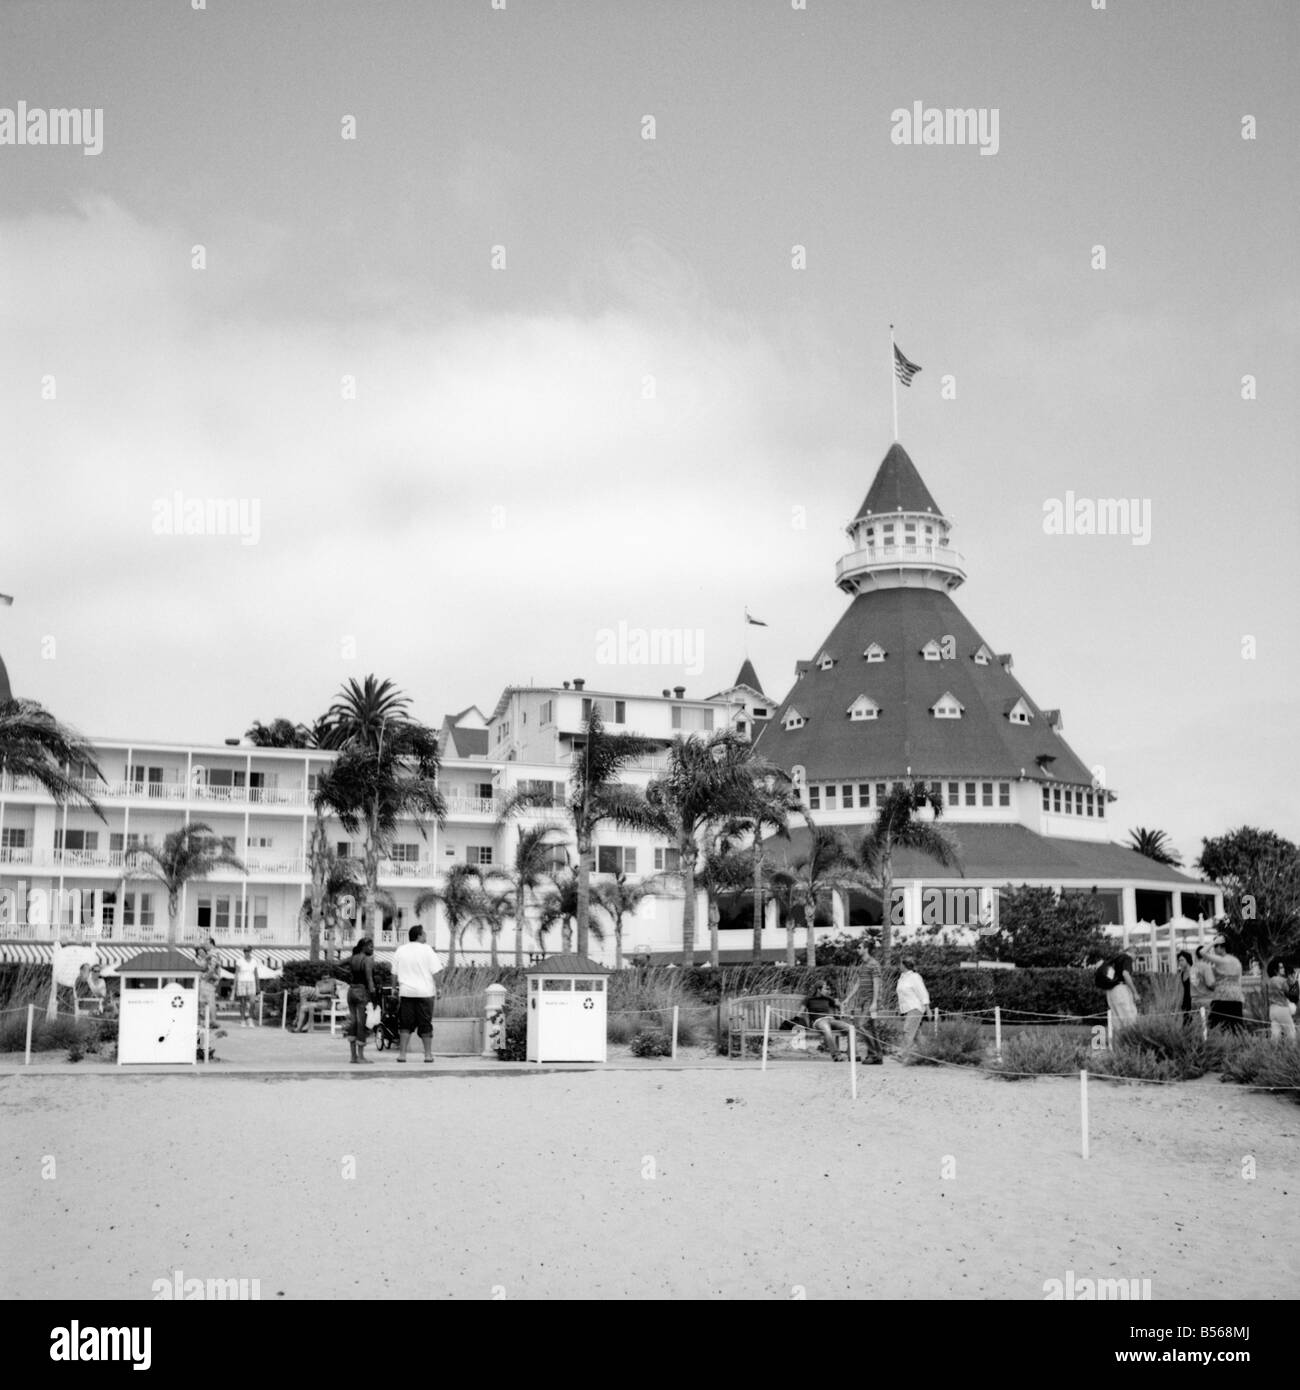 A view of the Hotel del Coronado from the backside of the property. Stock Photo